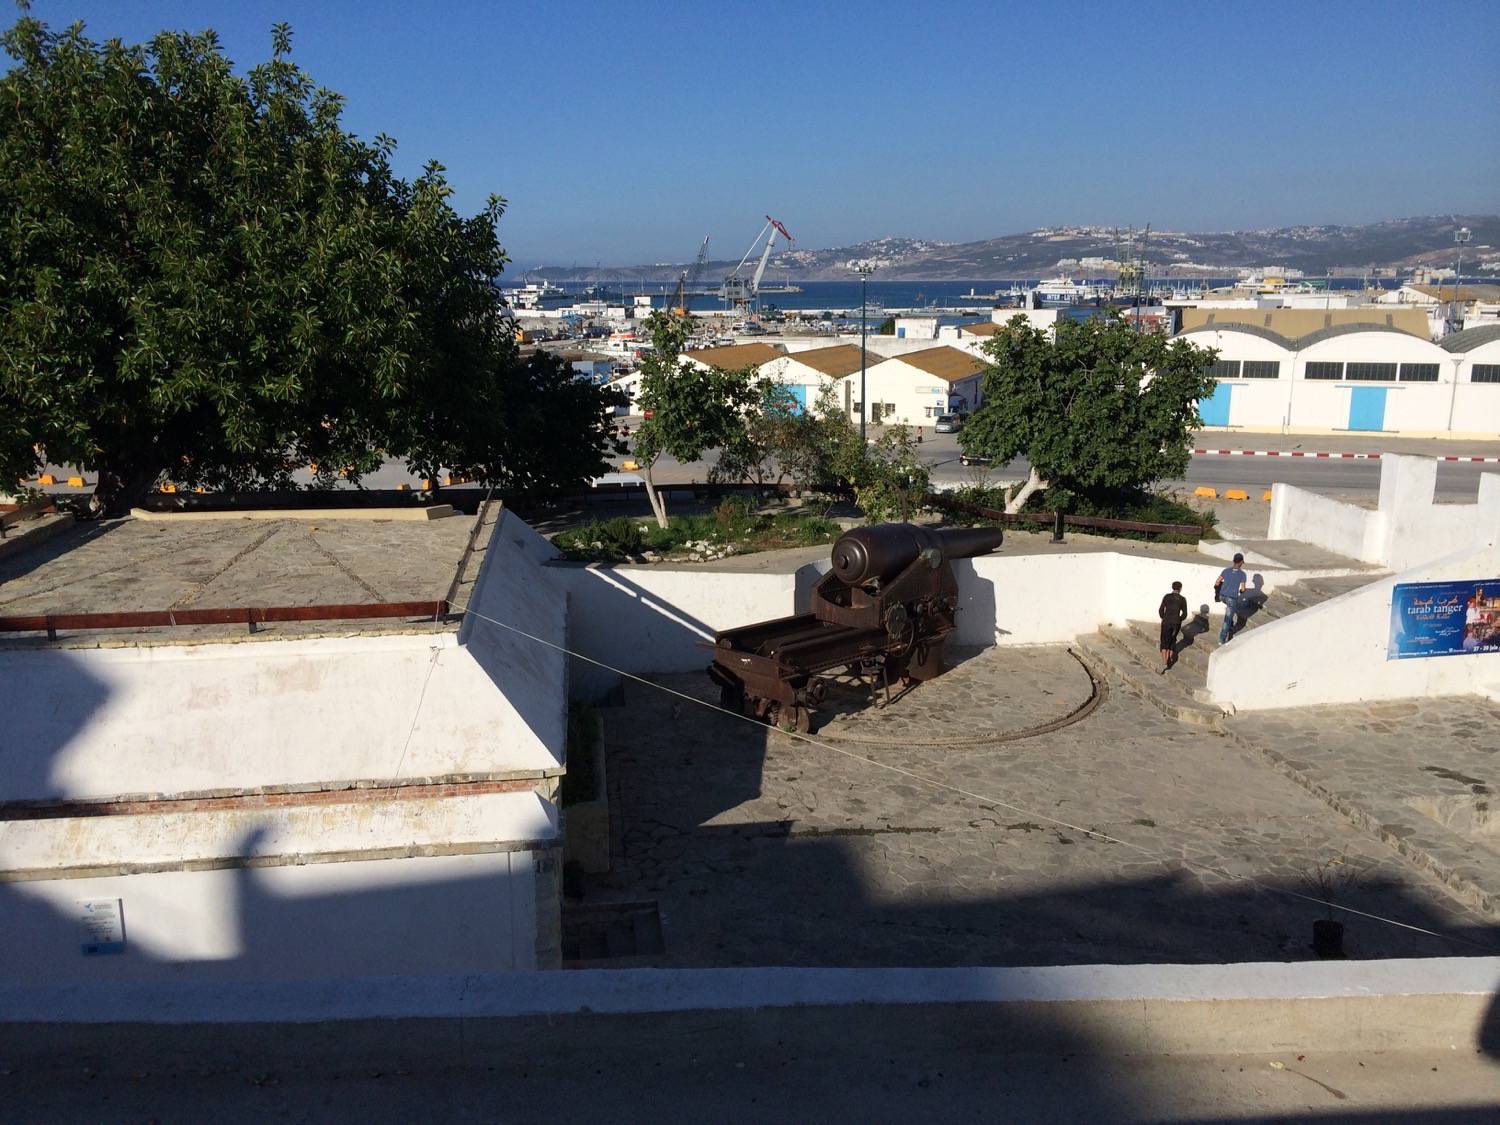 Daytime view from above of one of the Armstrong cannons and the Port of Tanger-Ville 